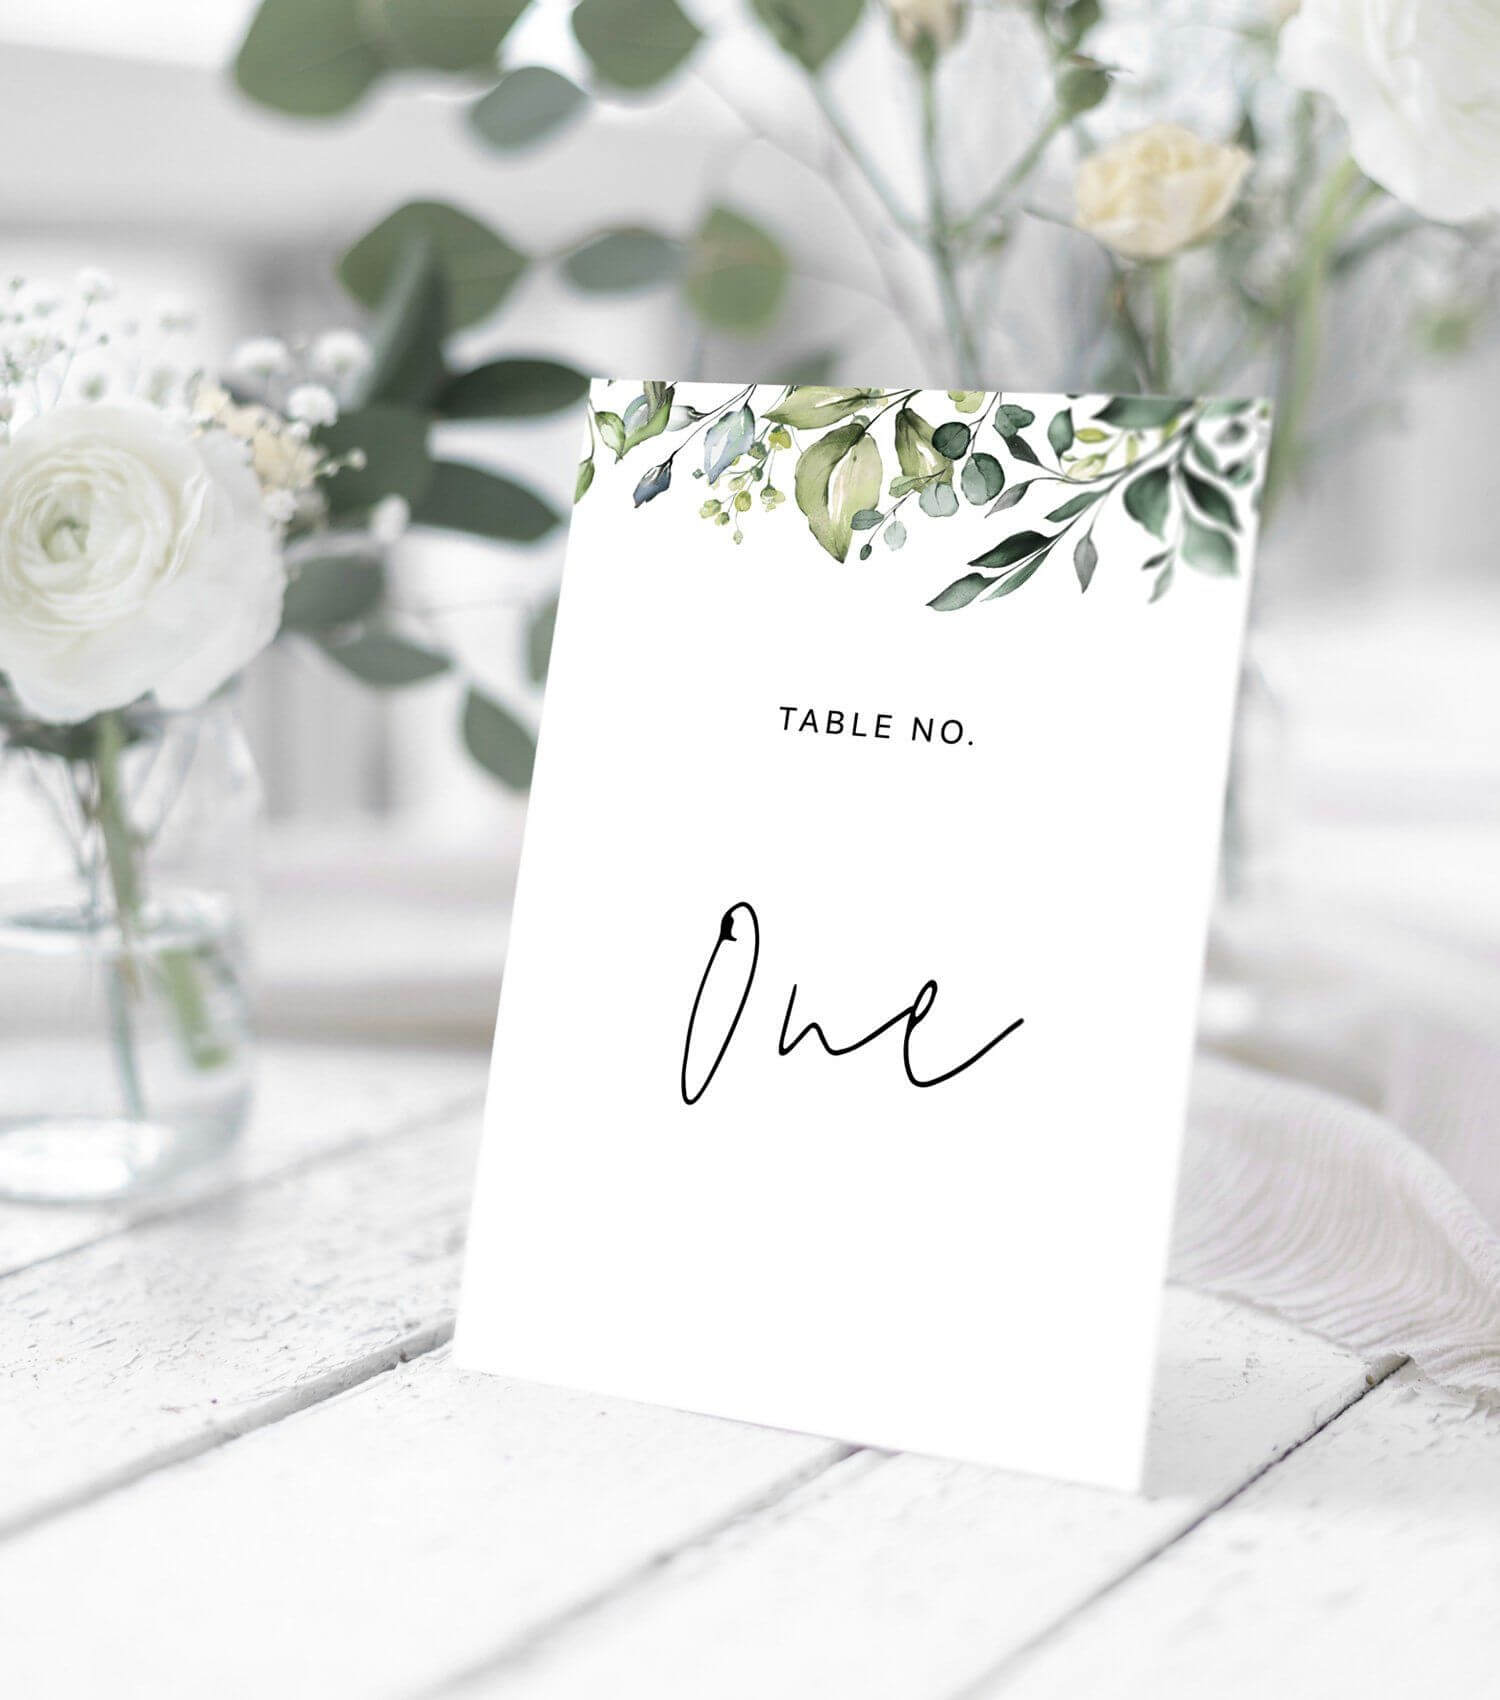 Wedding Table Number Card Template With Hand Painted Intended For Table Number Cards Template